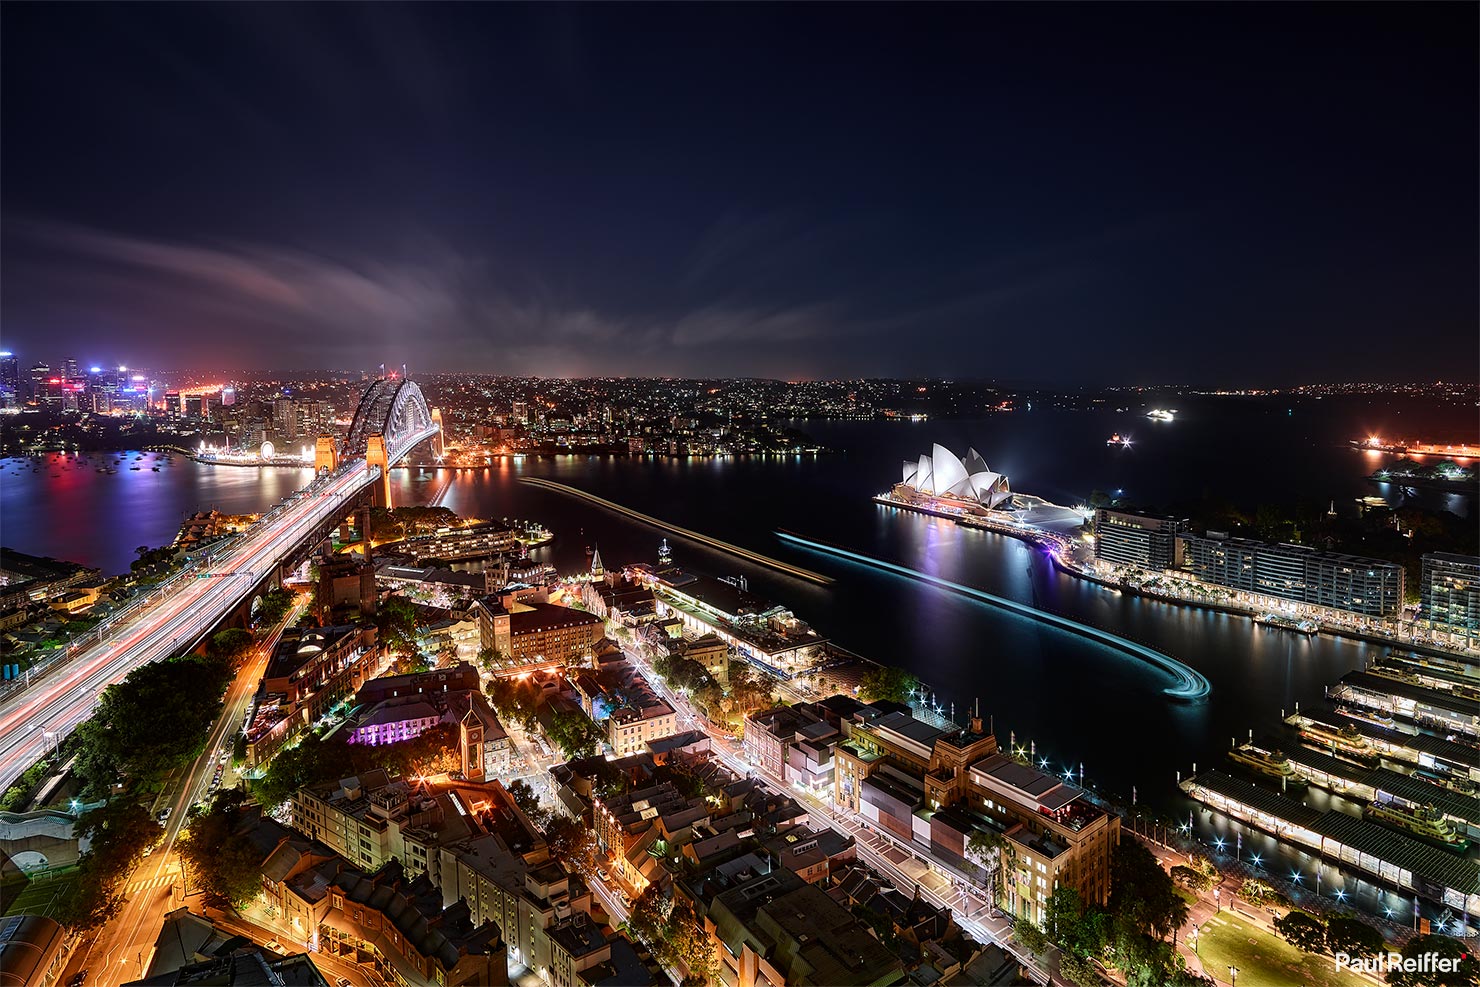 Sydney Above Down Under Rooftop Opera House Circular Quay Iconic Paul Reiffer Cityscape Photographer Guide Learn How Tips Tricks Phase One Night City Top 10